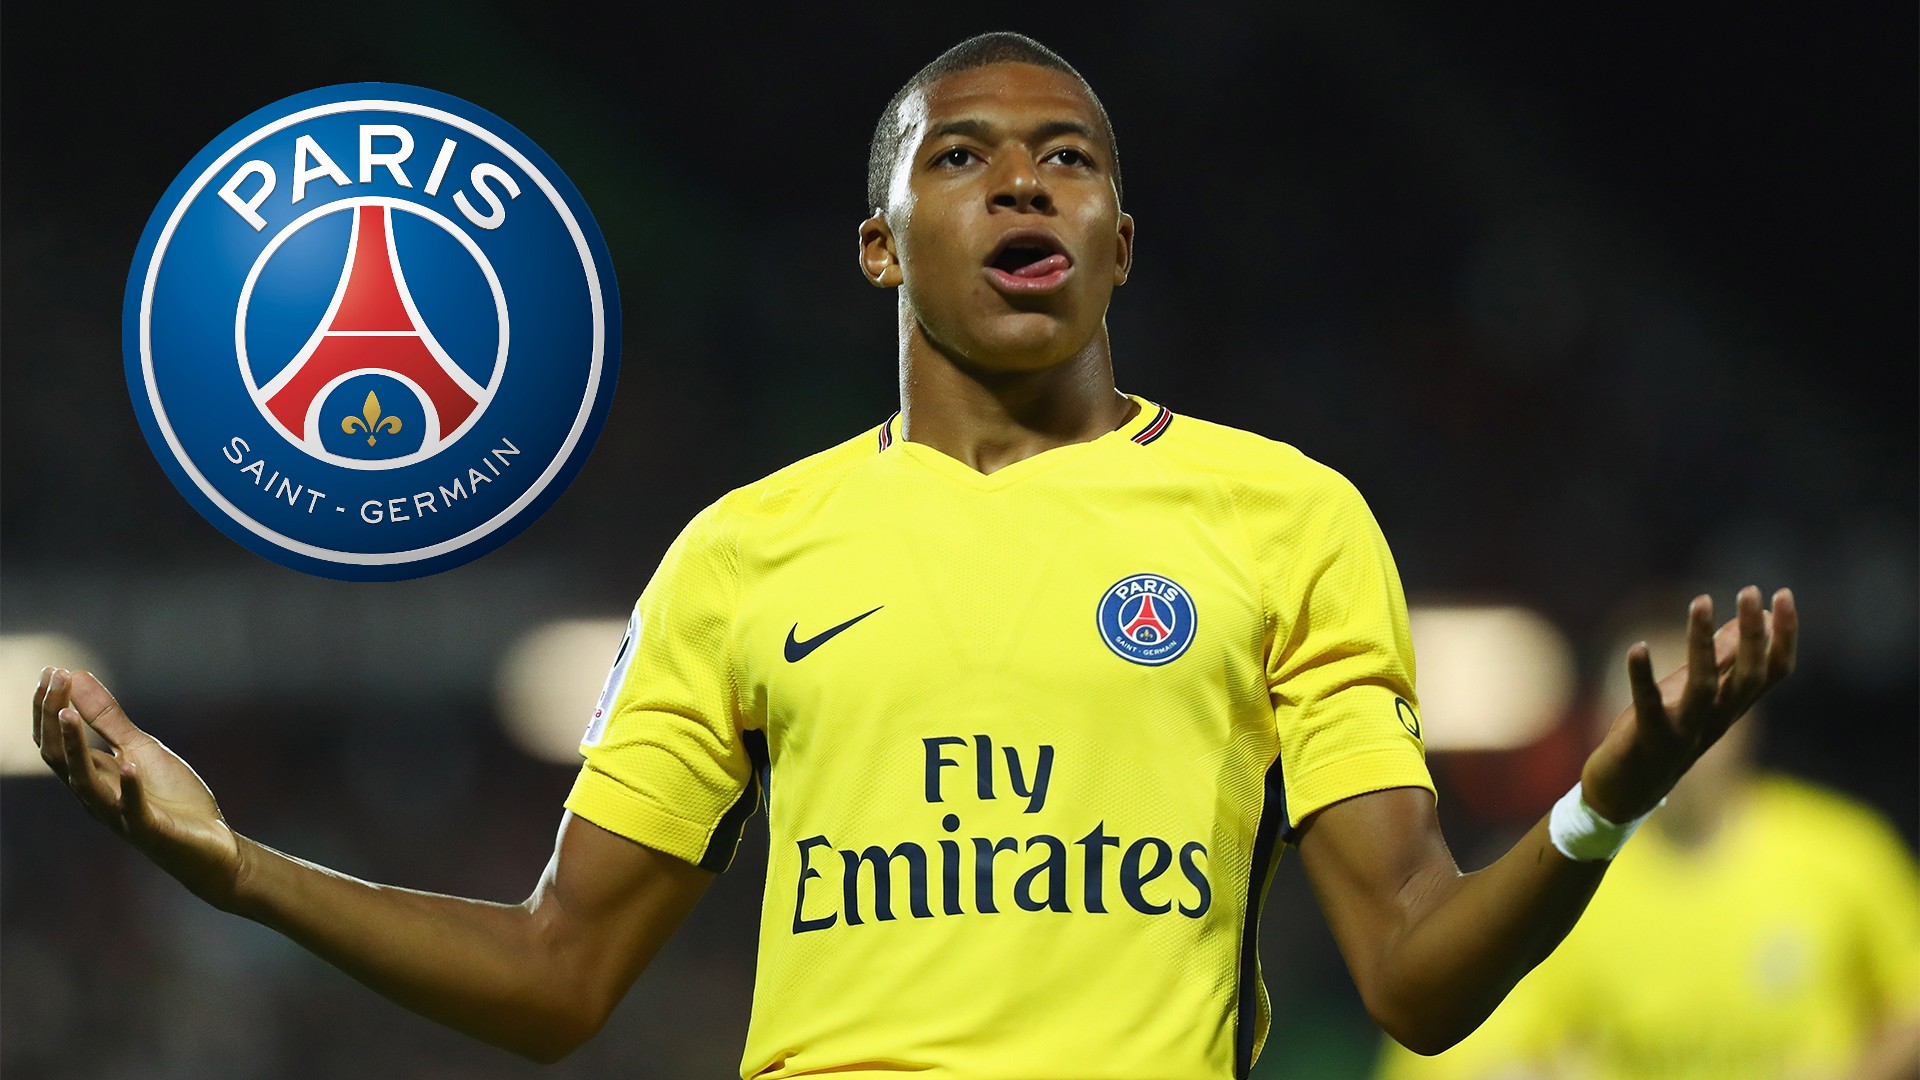 PSG Kylian Mbappe HD Wallpapers With Resolution 1920X1080 pixel. You can make this wallpaper for your Mac or Windows Desktop Background, iPhone, Android or Tablet and another Smartphone device for free